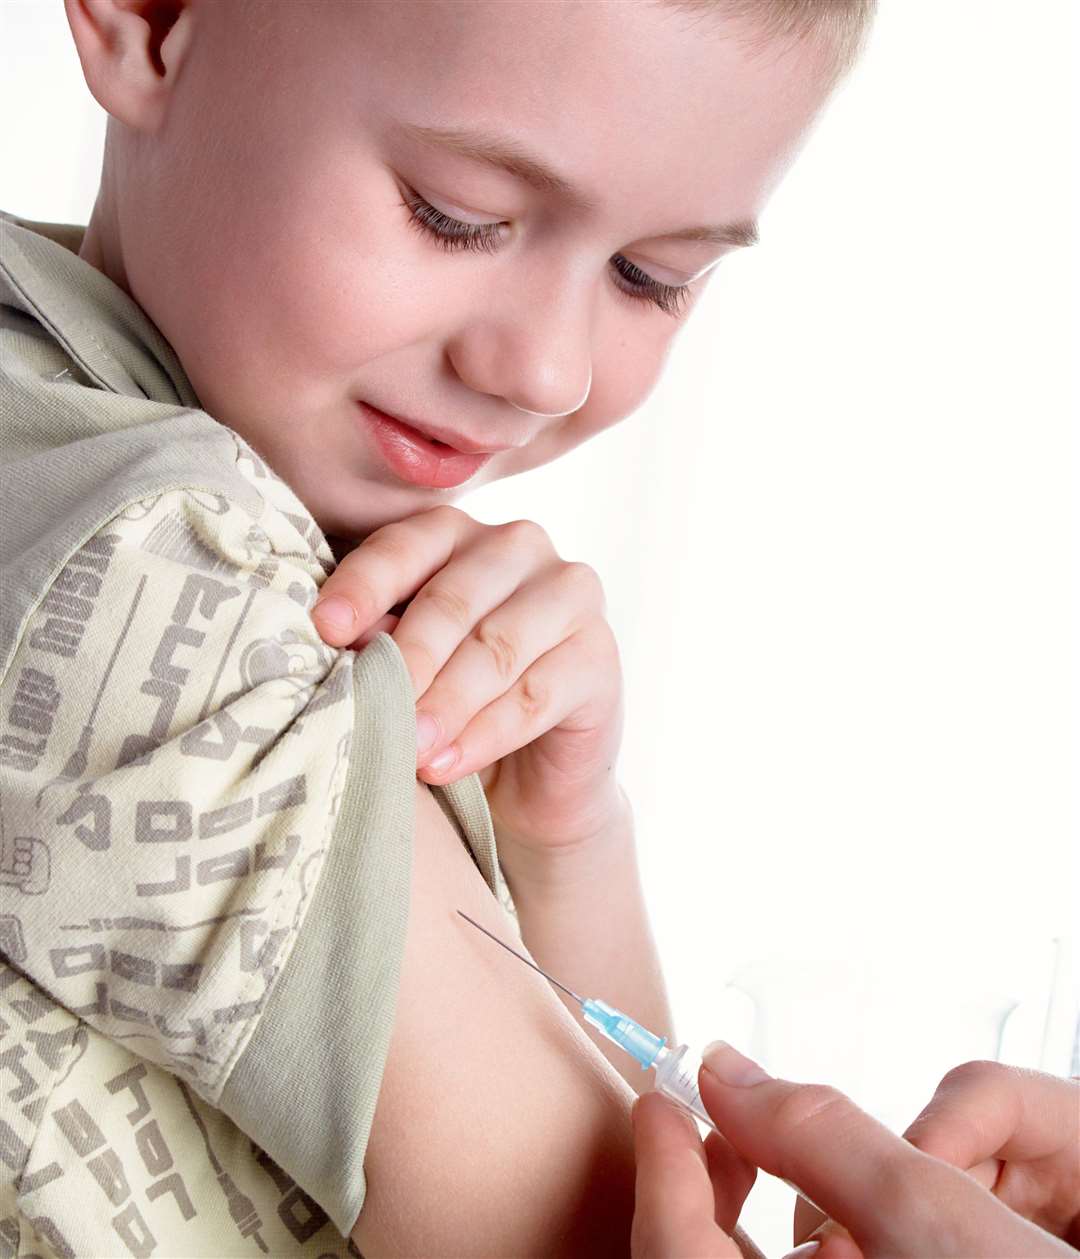 A child having an injection